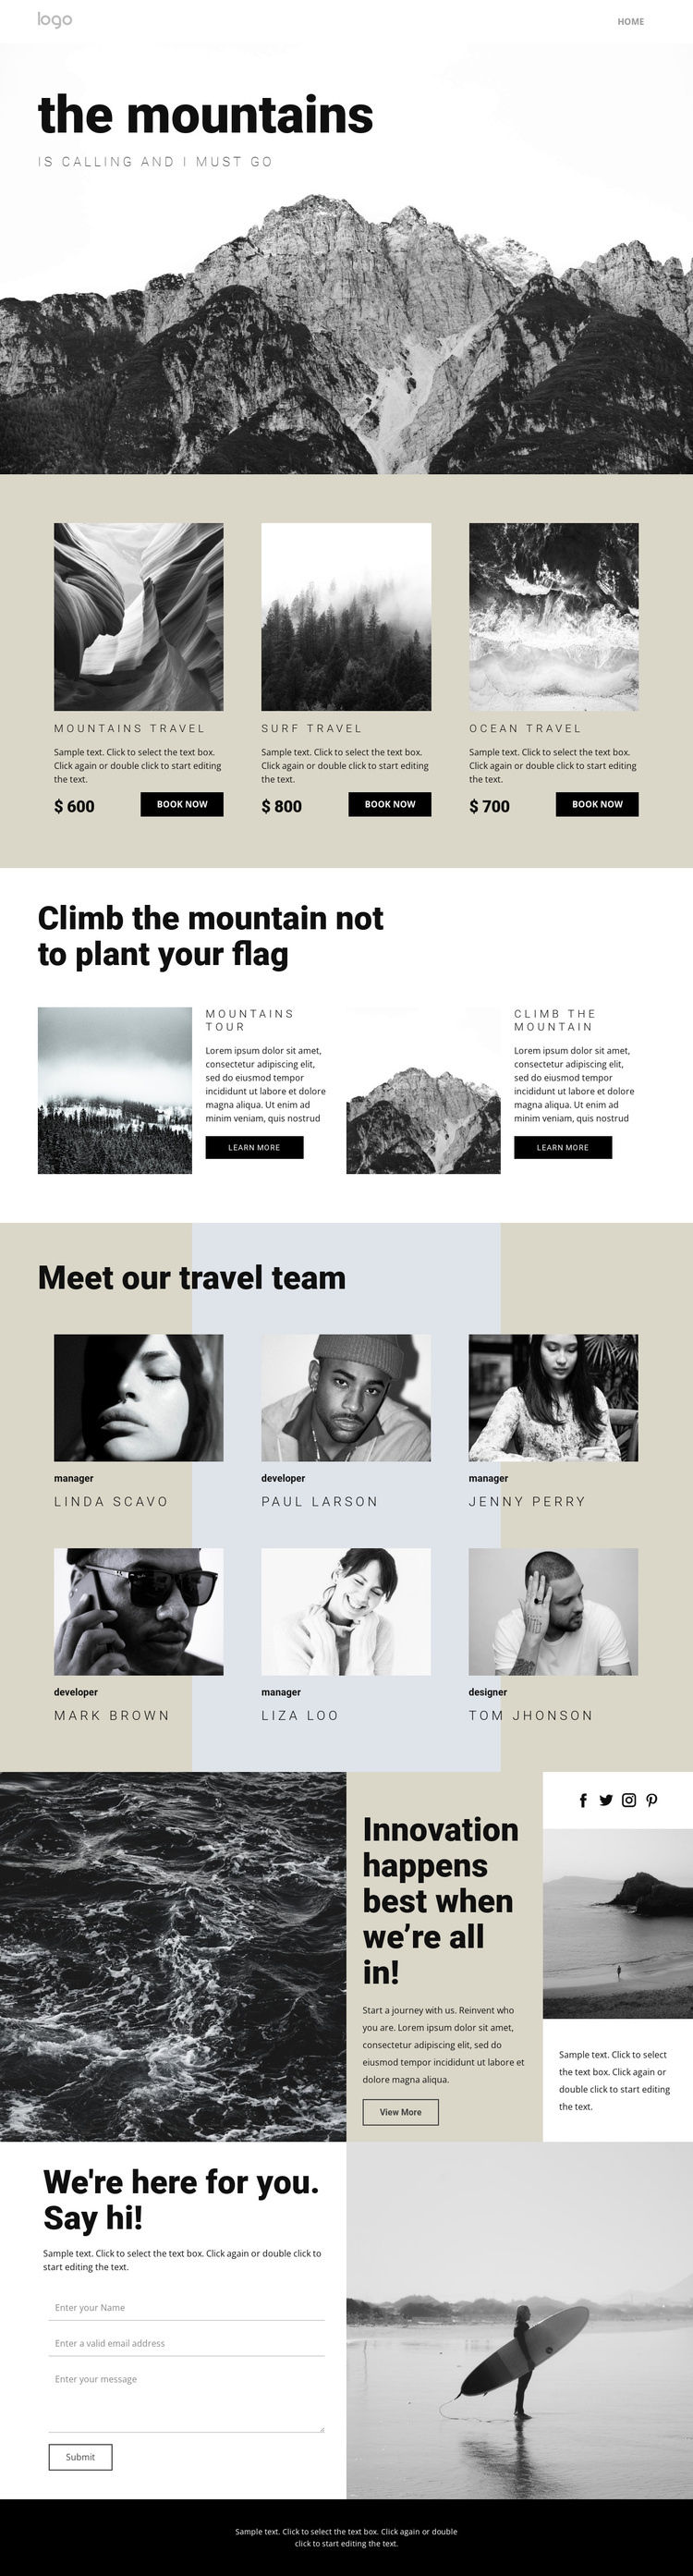 Agency for people who travel Joomla Template